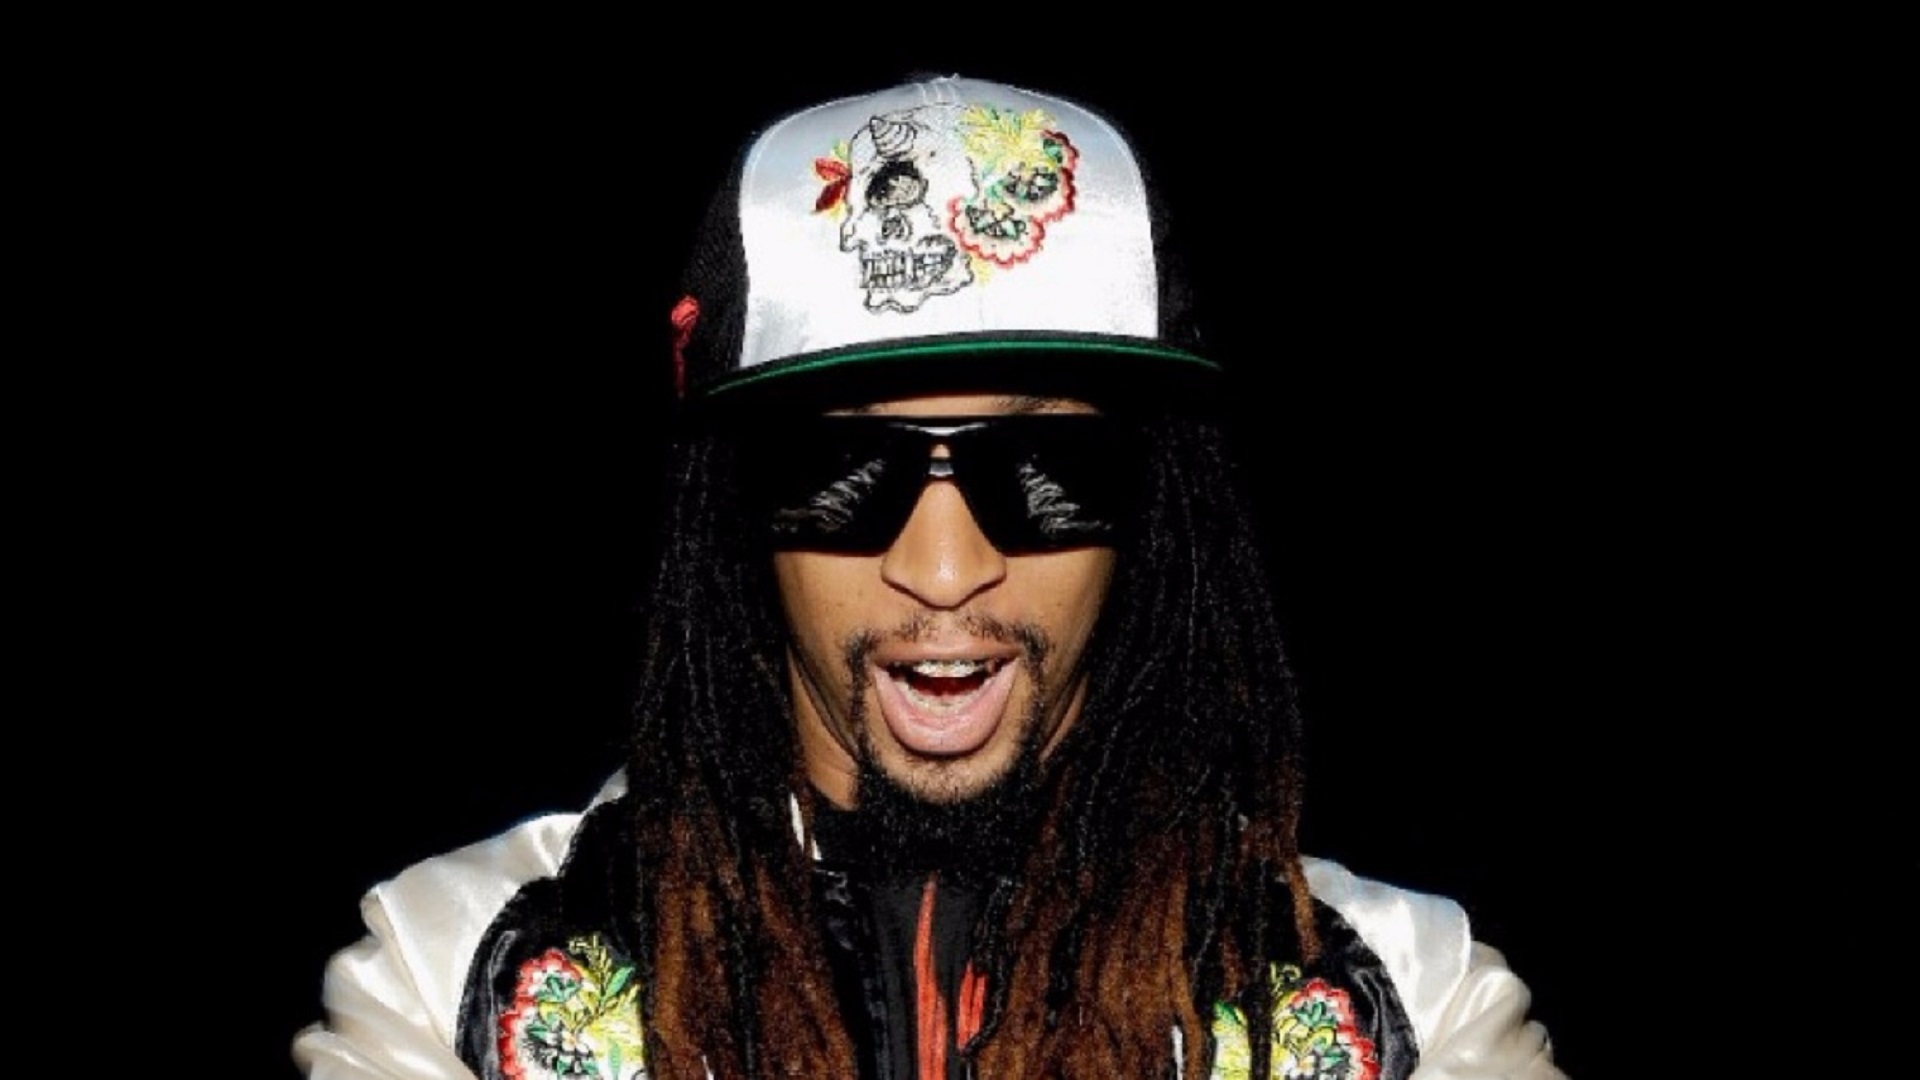 Lil Jon Wallpapers Images Photos Pictures Backgrounds 1920x1080